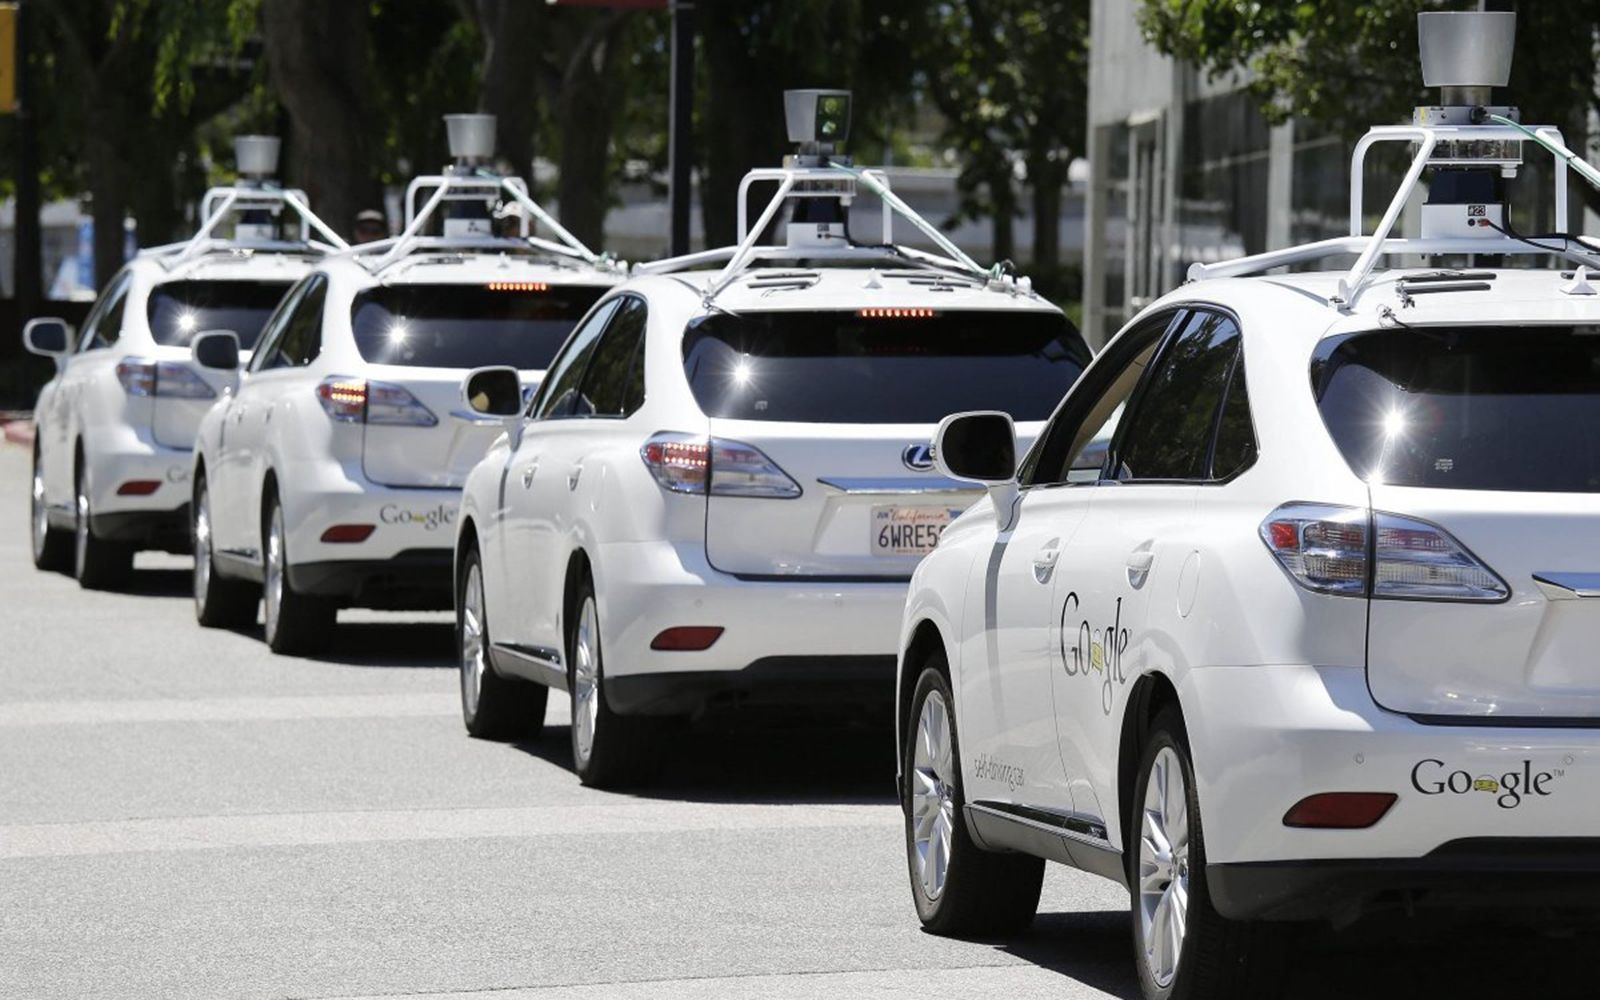 google s self driving car crash is media coverage just hype or should we know more  image 1